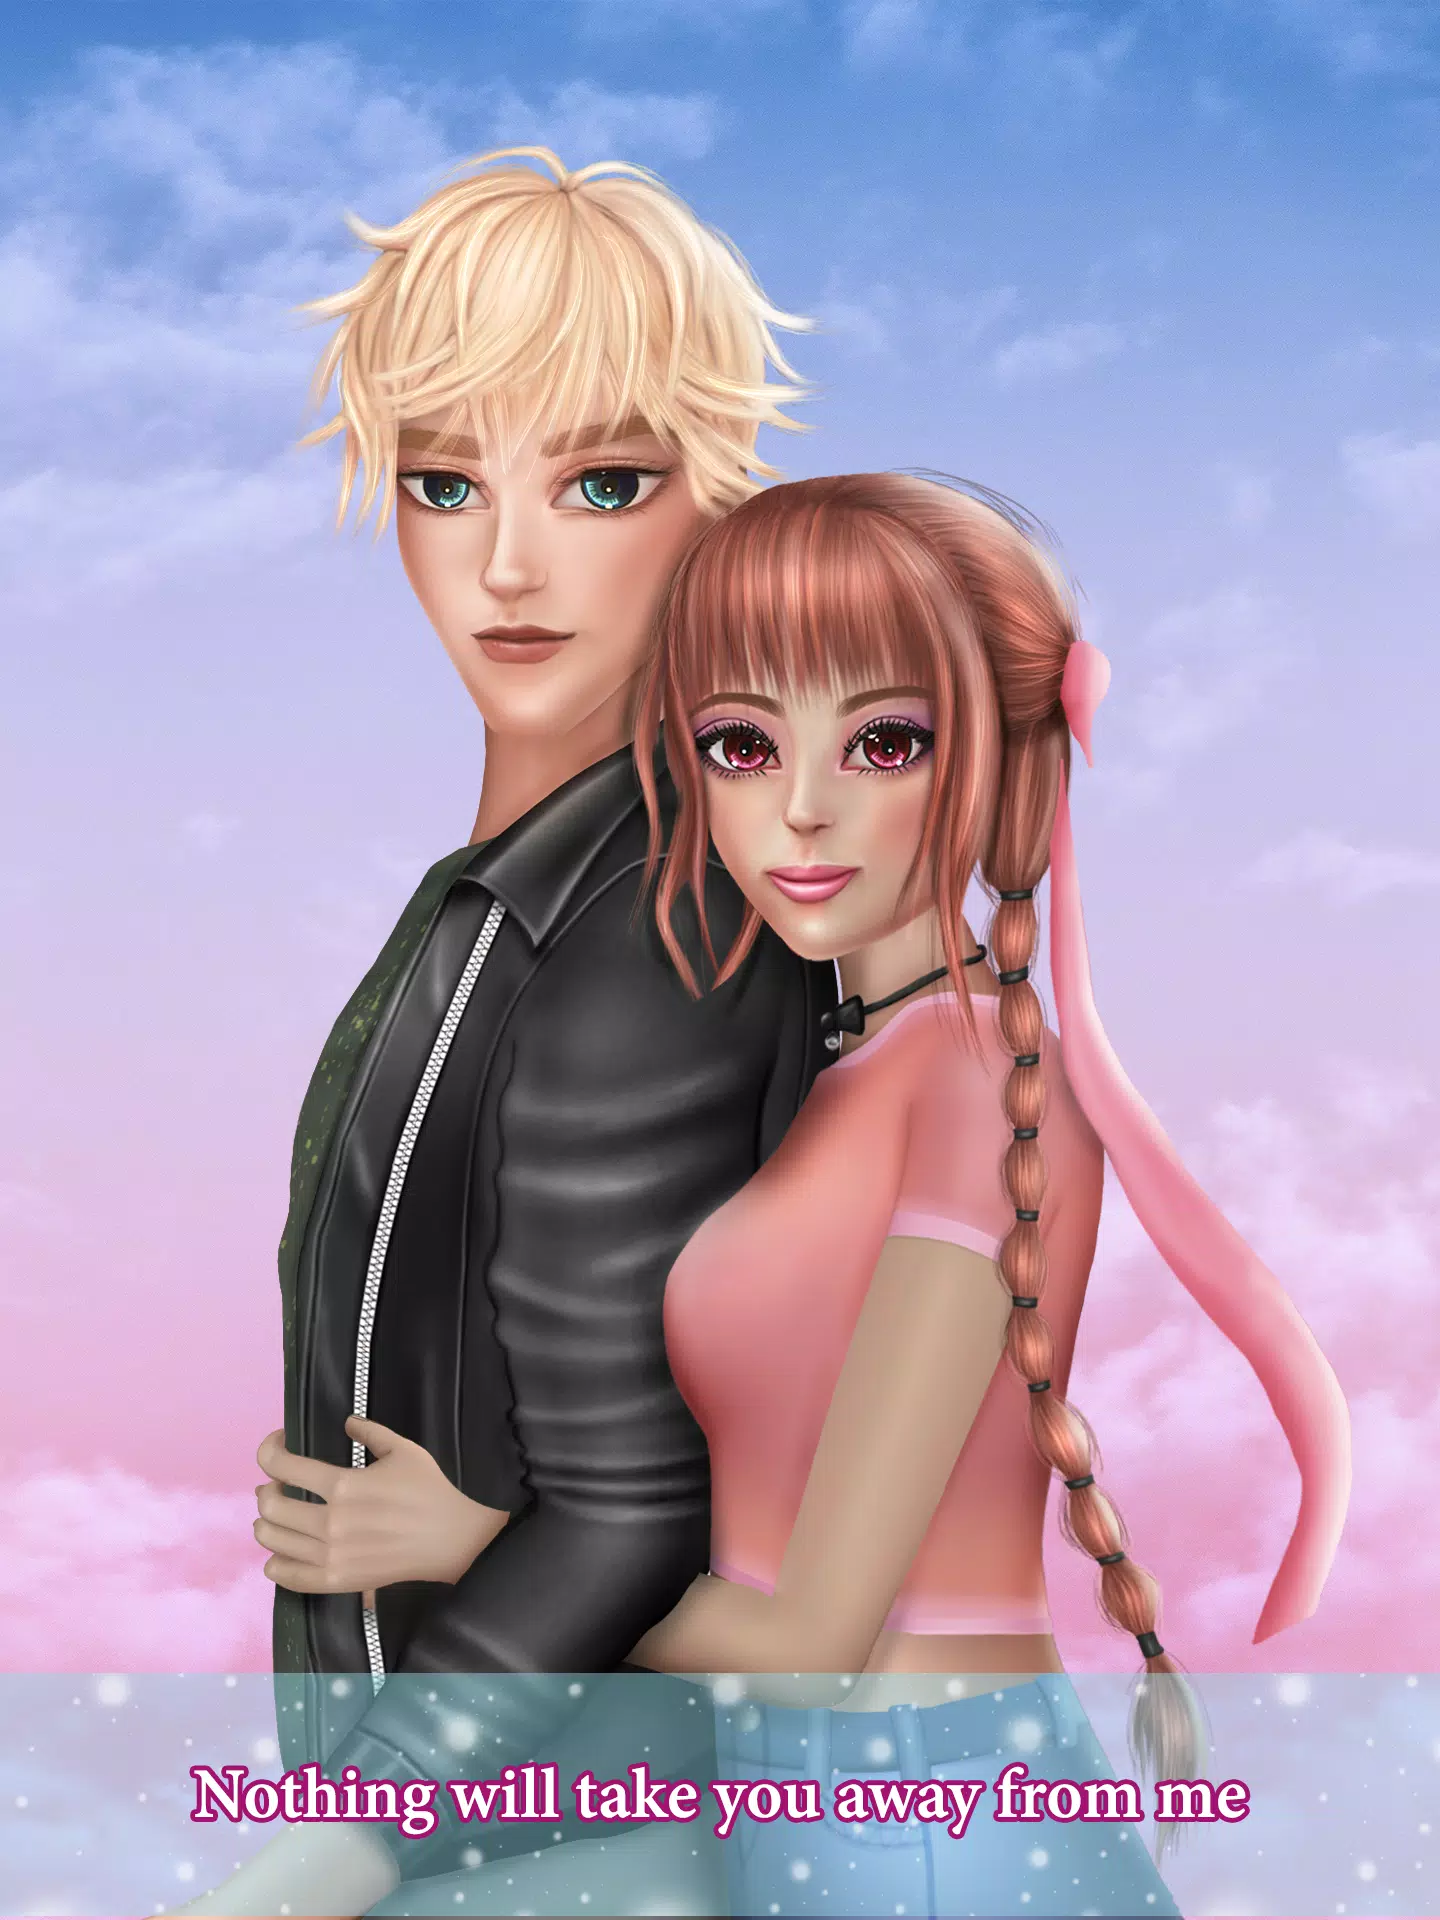 Anime Love Story Games: Shadowtime for Android - Download the APK